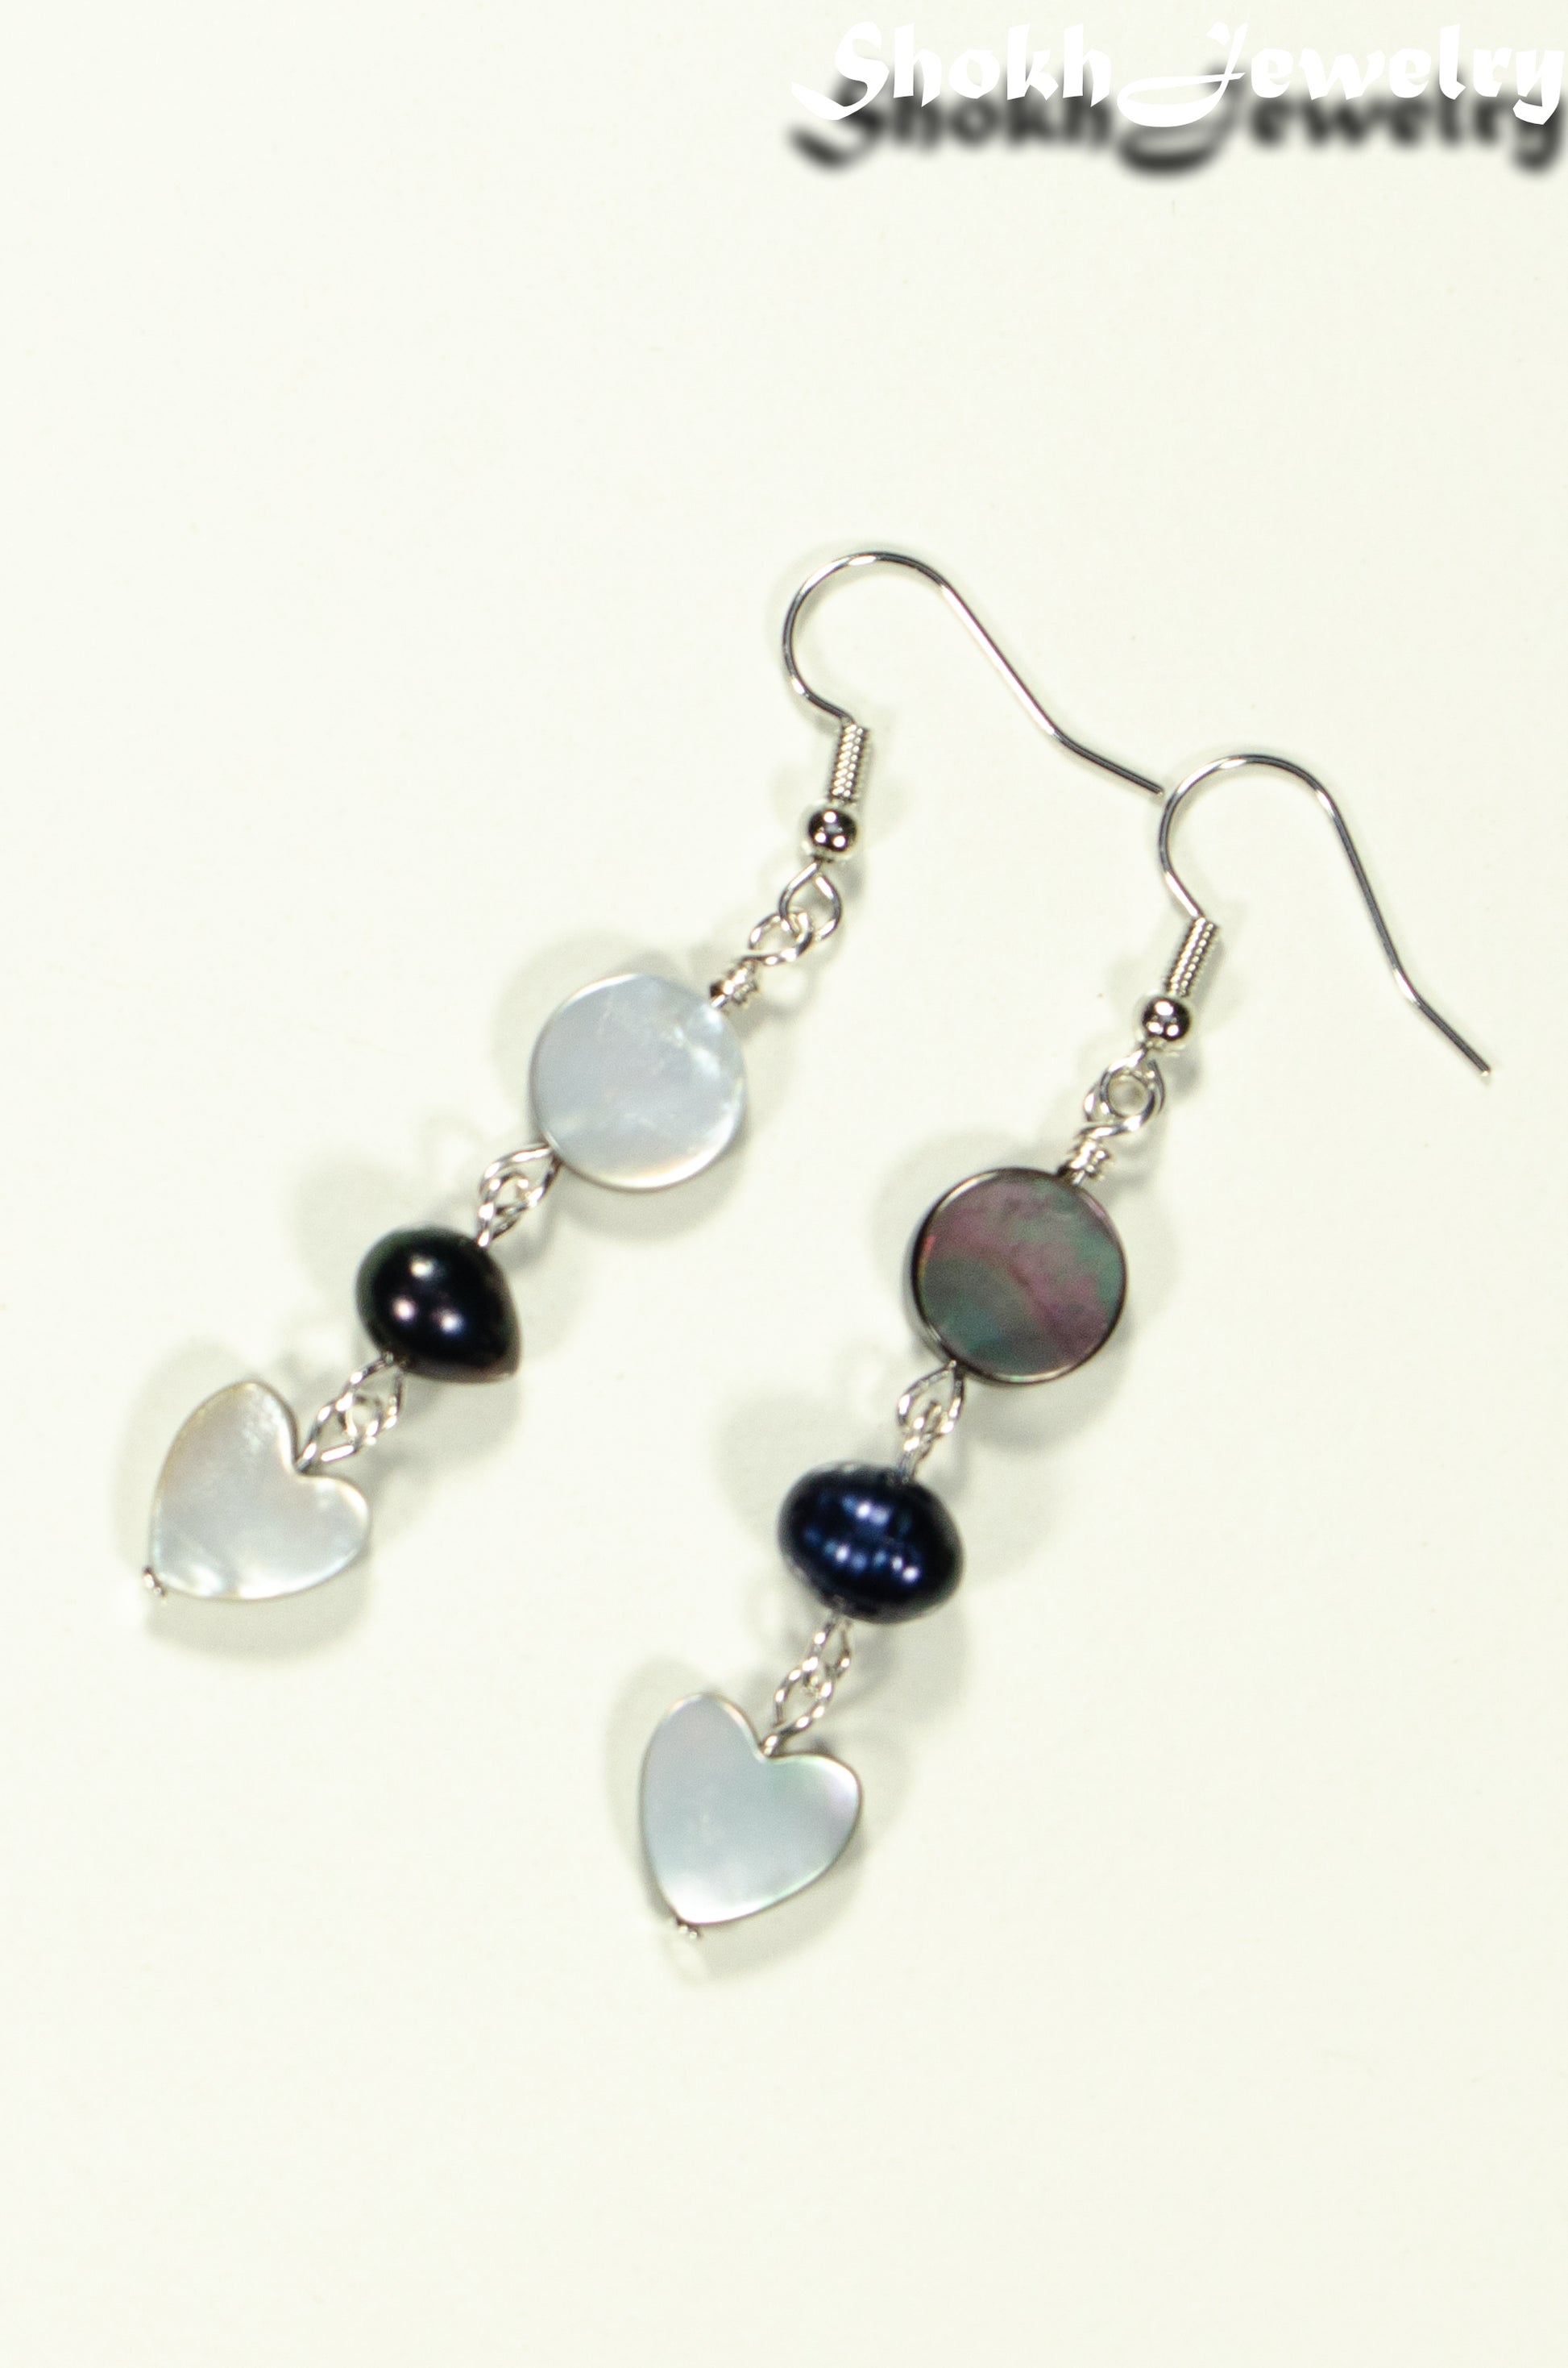 Top view of Grey Seashell and Black Pearl Earrings.